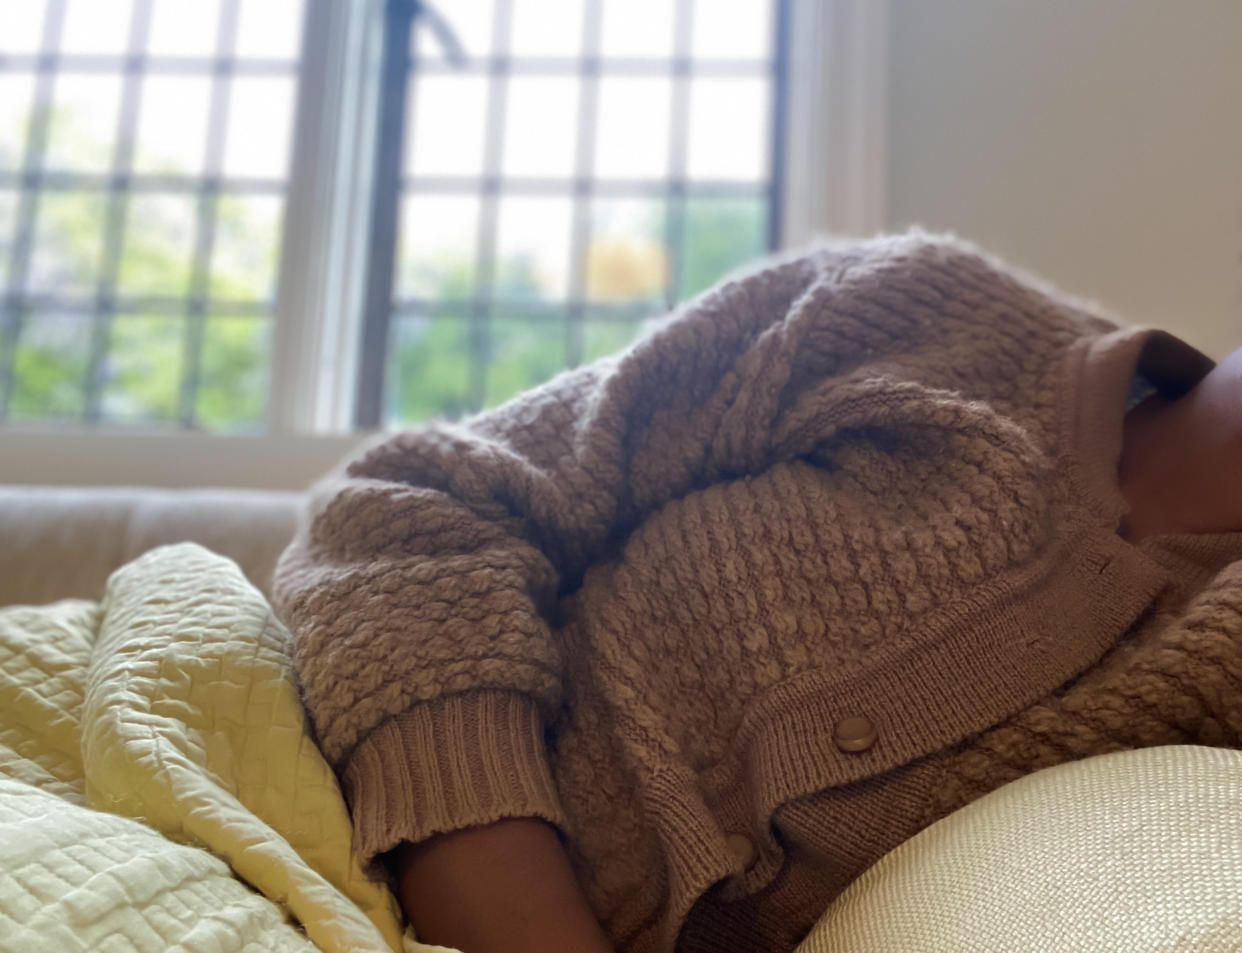 Person resting while sick